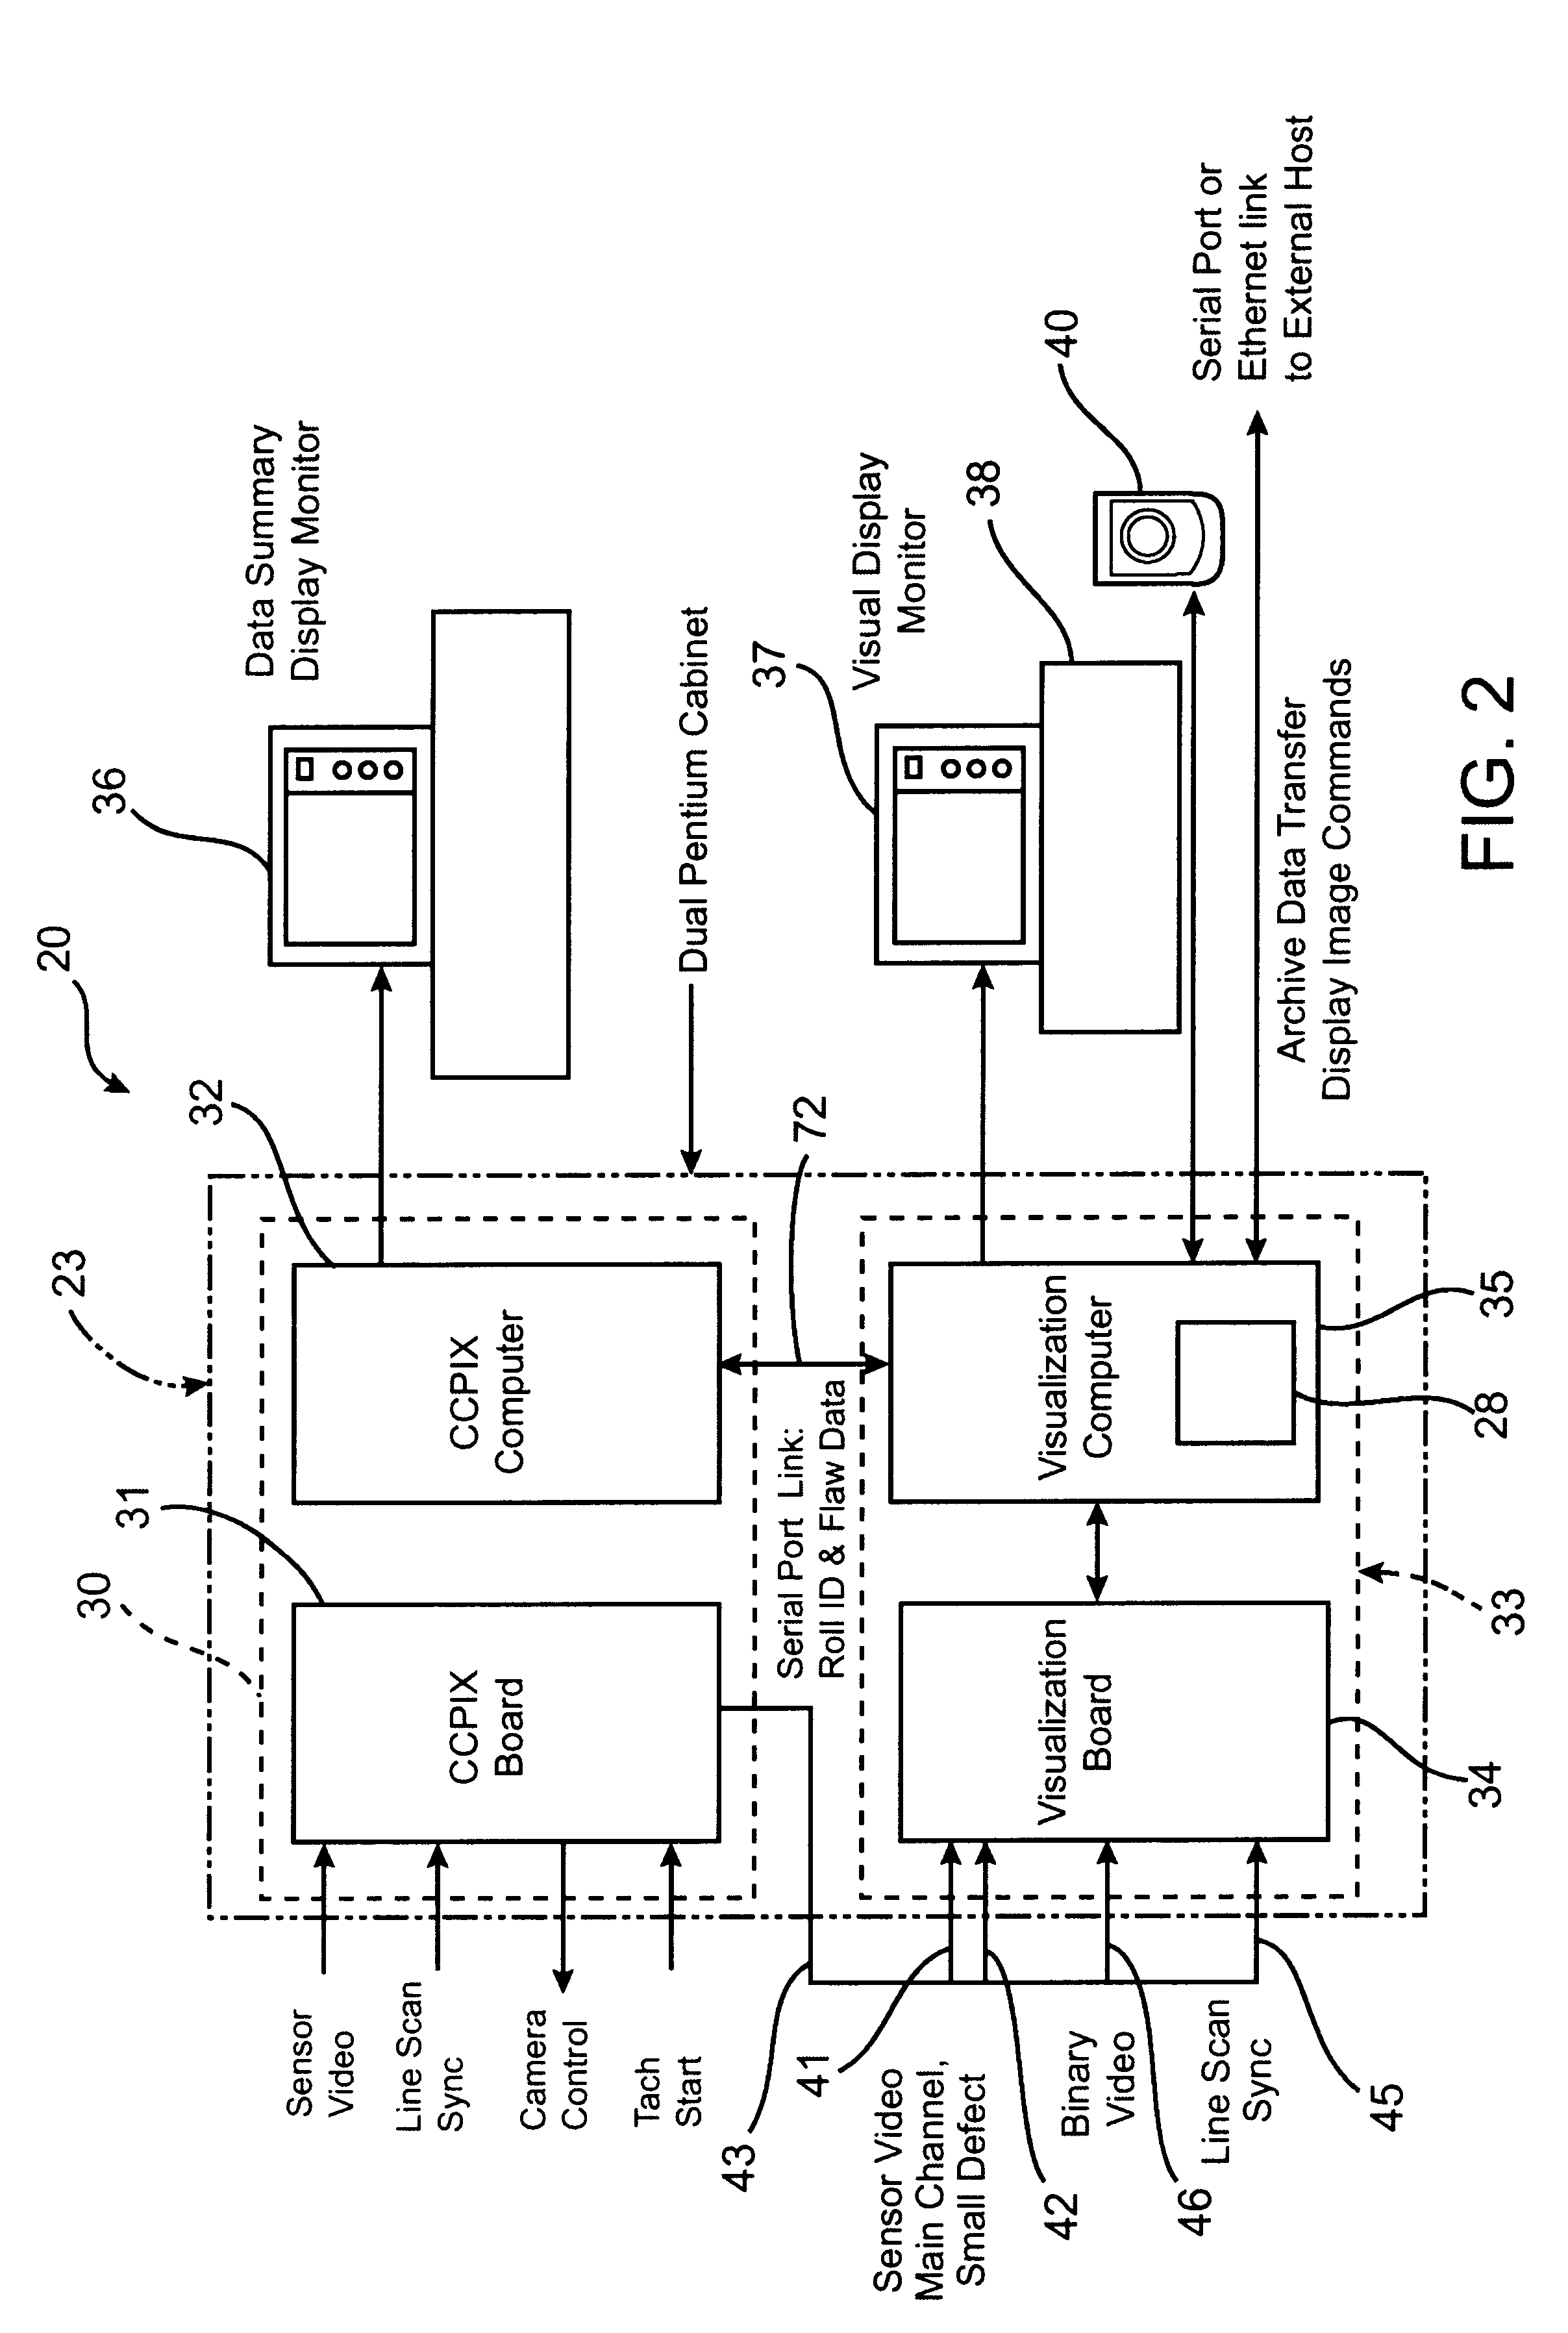 Visualization system and method for a web inspection assembly